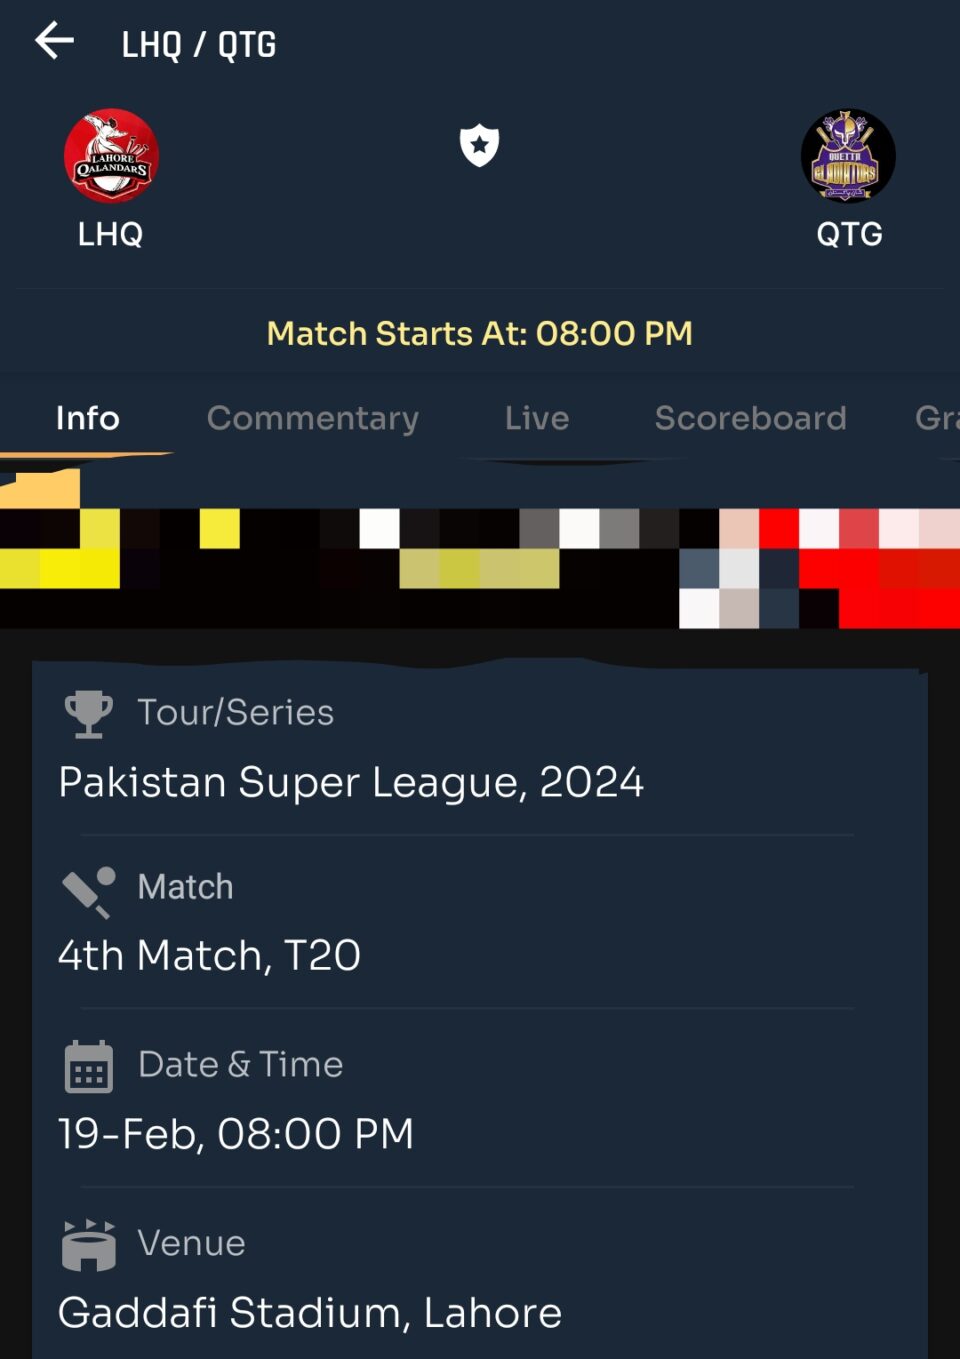 Today PSL Prediction |Match Number 4|LHQ vs QTG| Toss and Match Analysis | Pitch & Weather Reports